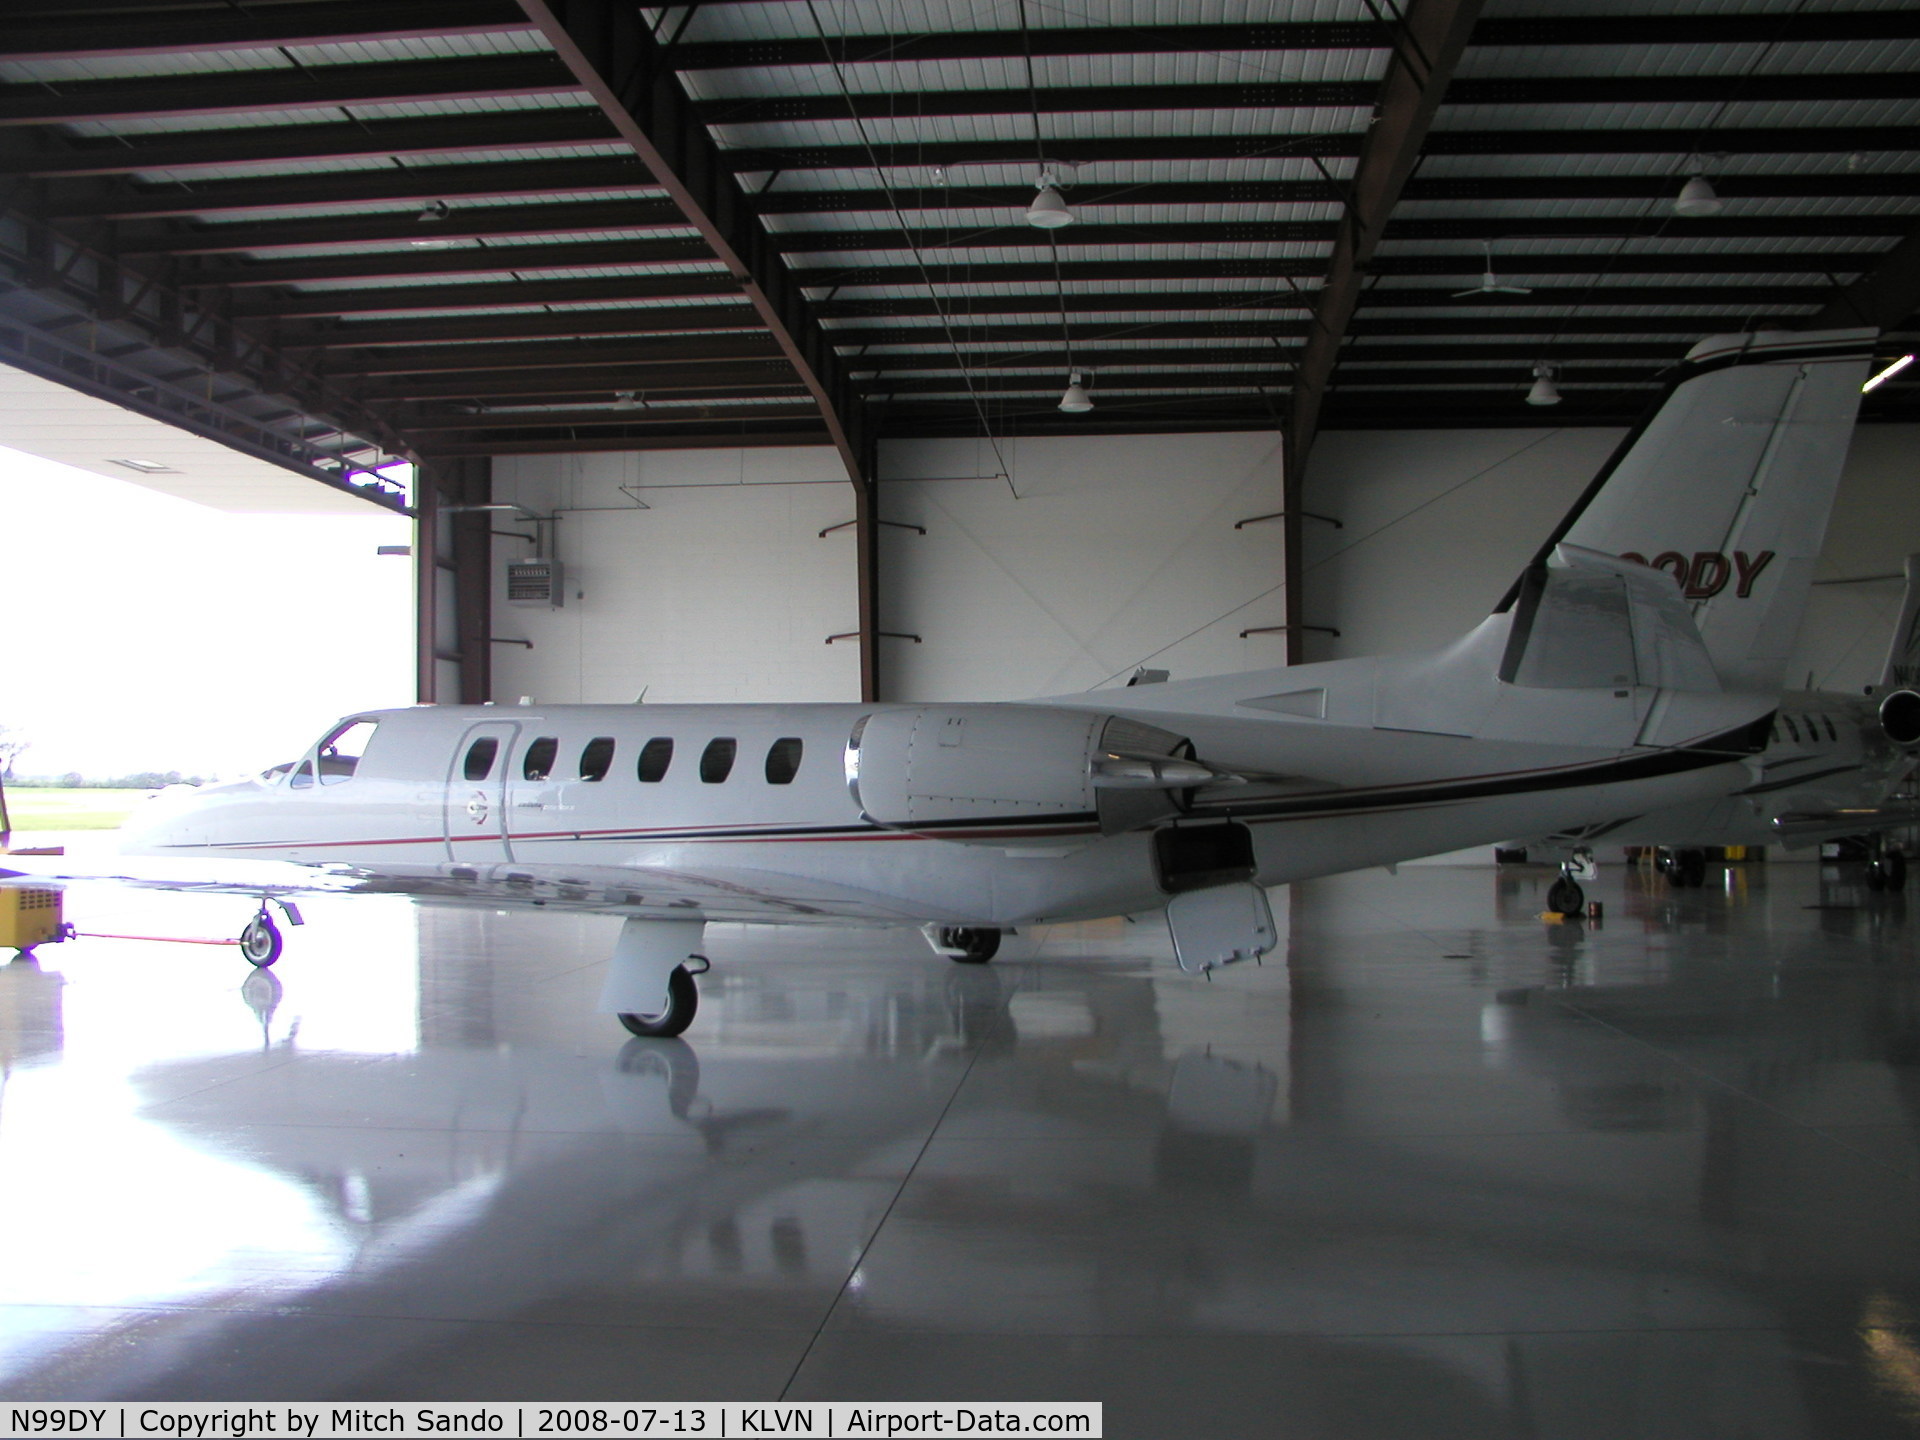 N99DY, 1983 Cessna 550 C/N 550-0482, Recently changed N-Number from 594G. Parked inside the ARC Hangar.